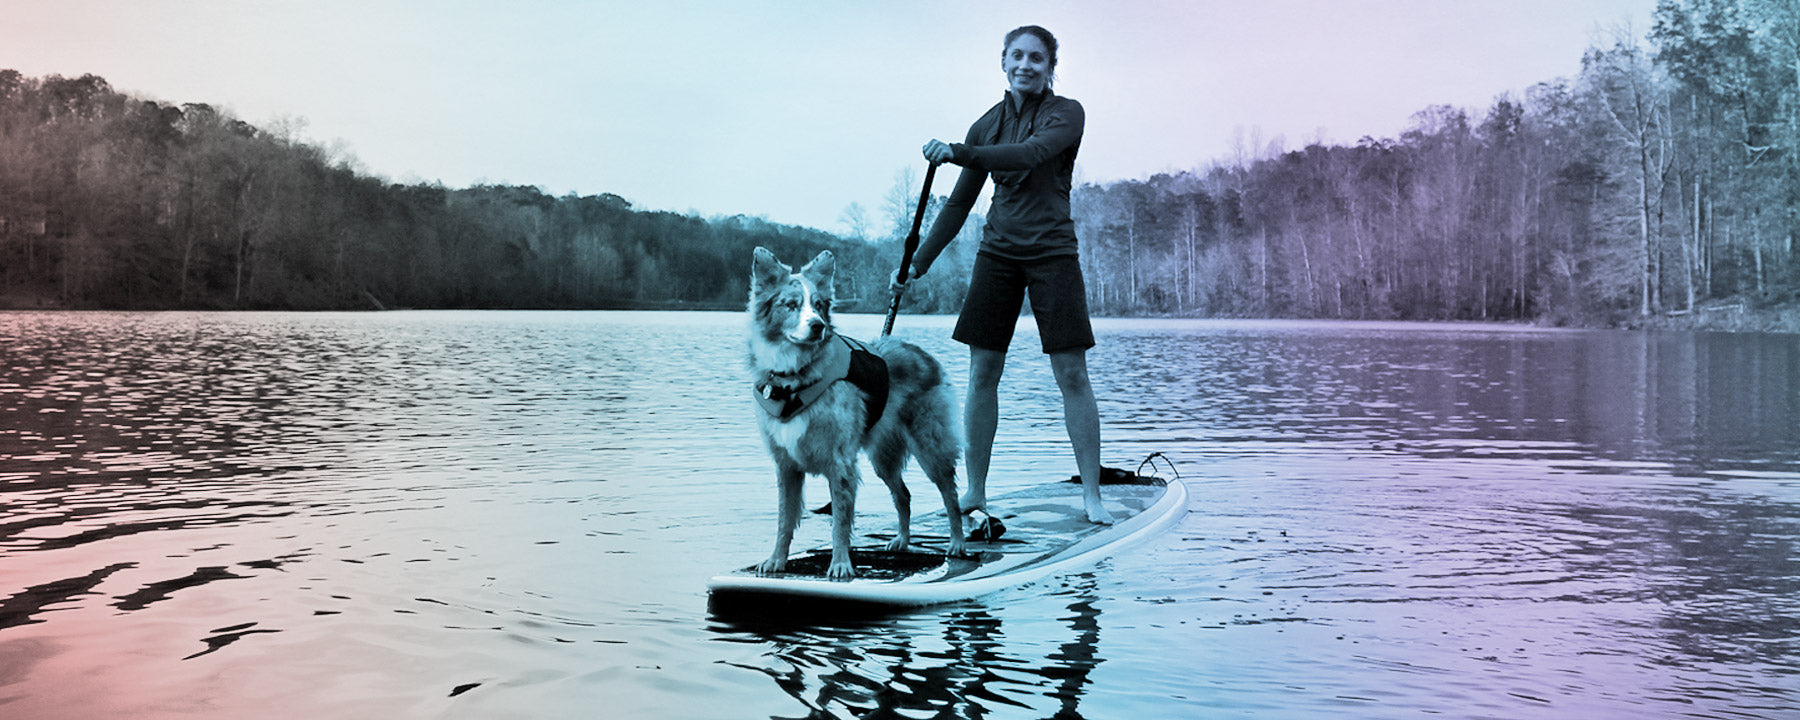 Doggy Paddling - Stand Up Paddleboarding with Your Dog - Turn The Tide, a blog by HeySurf